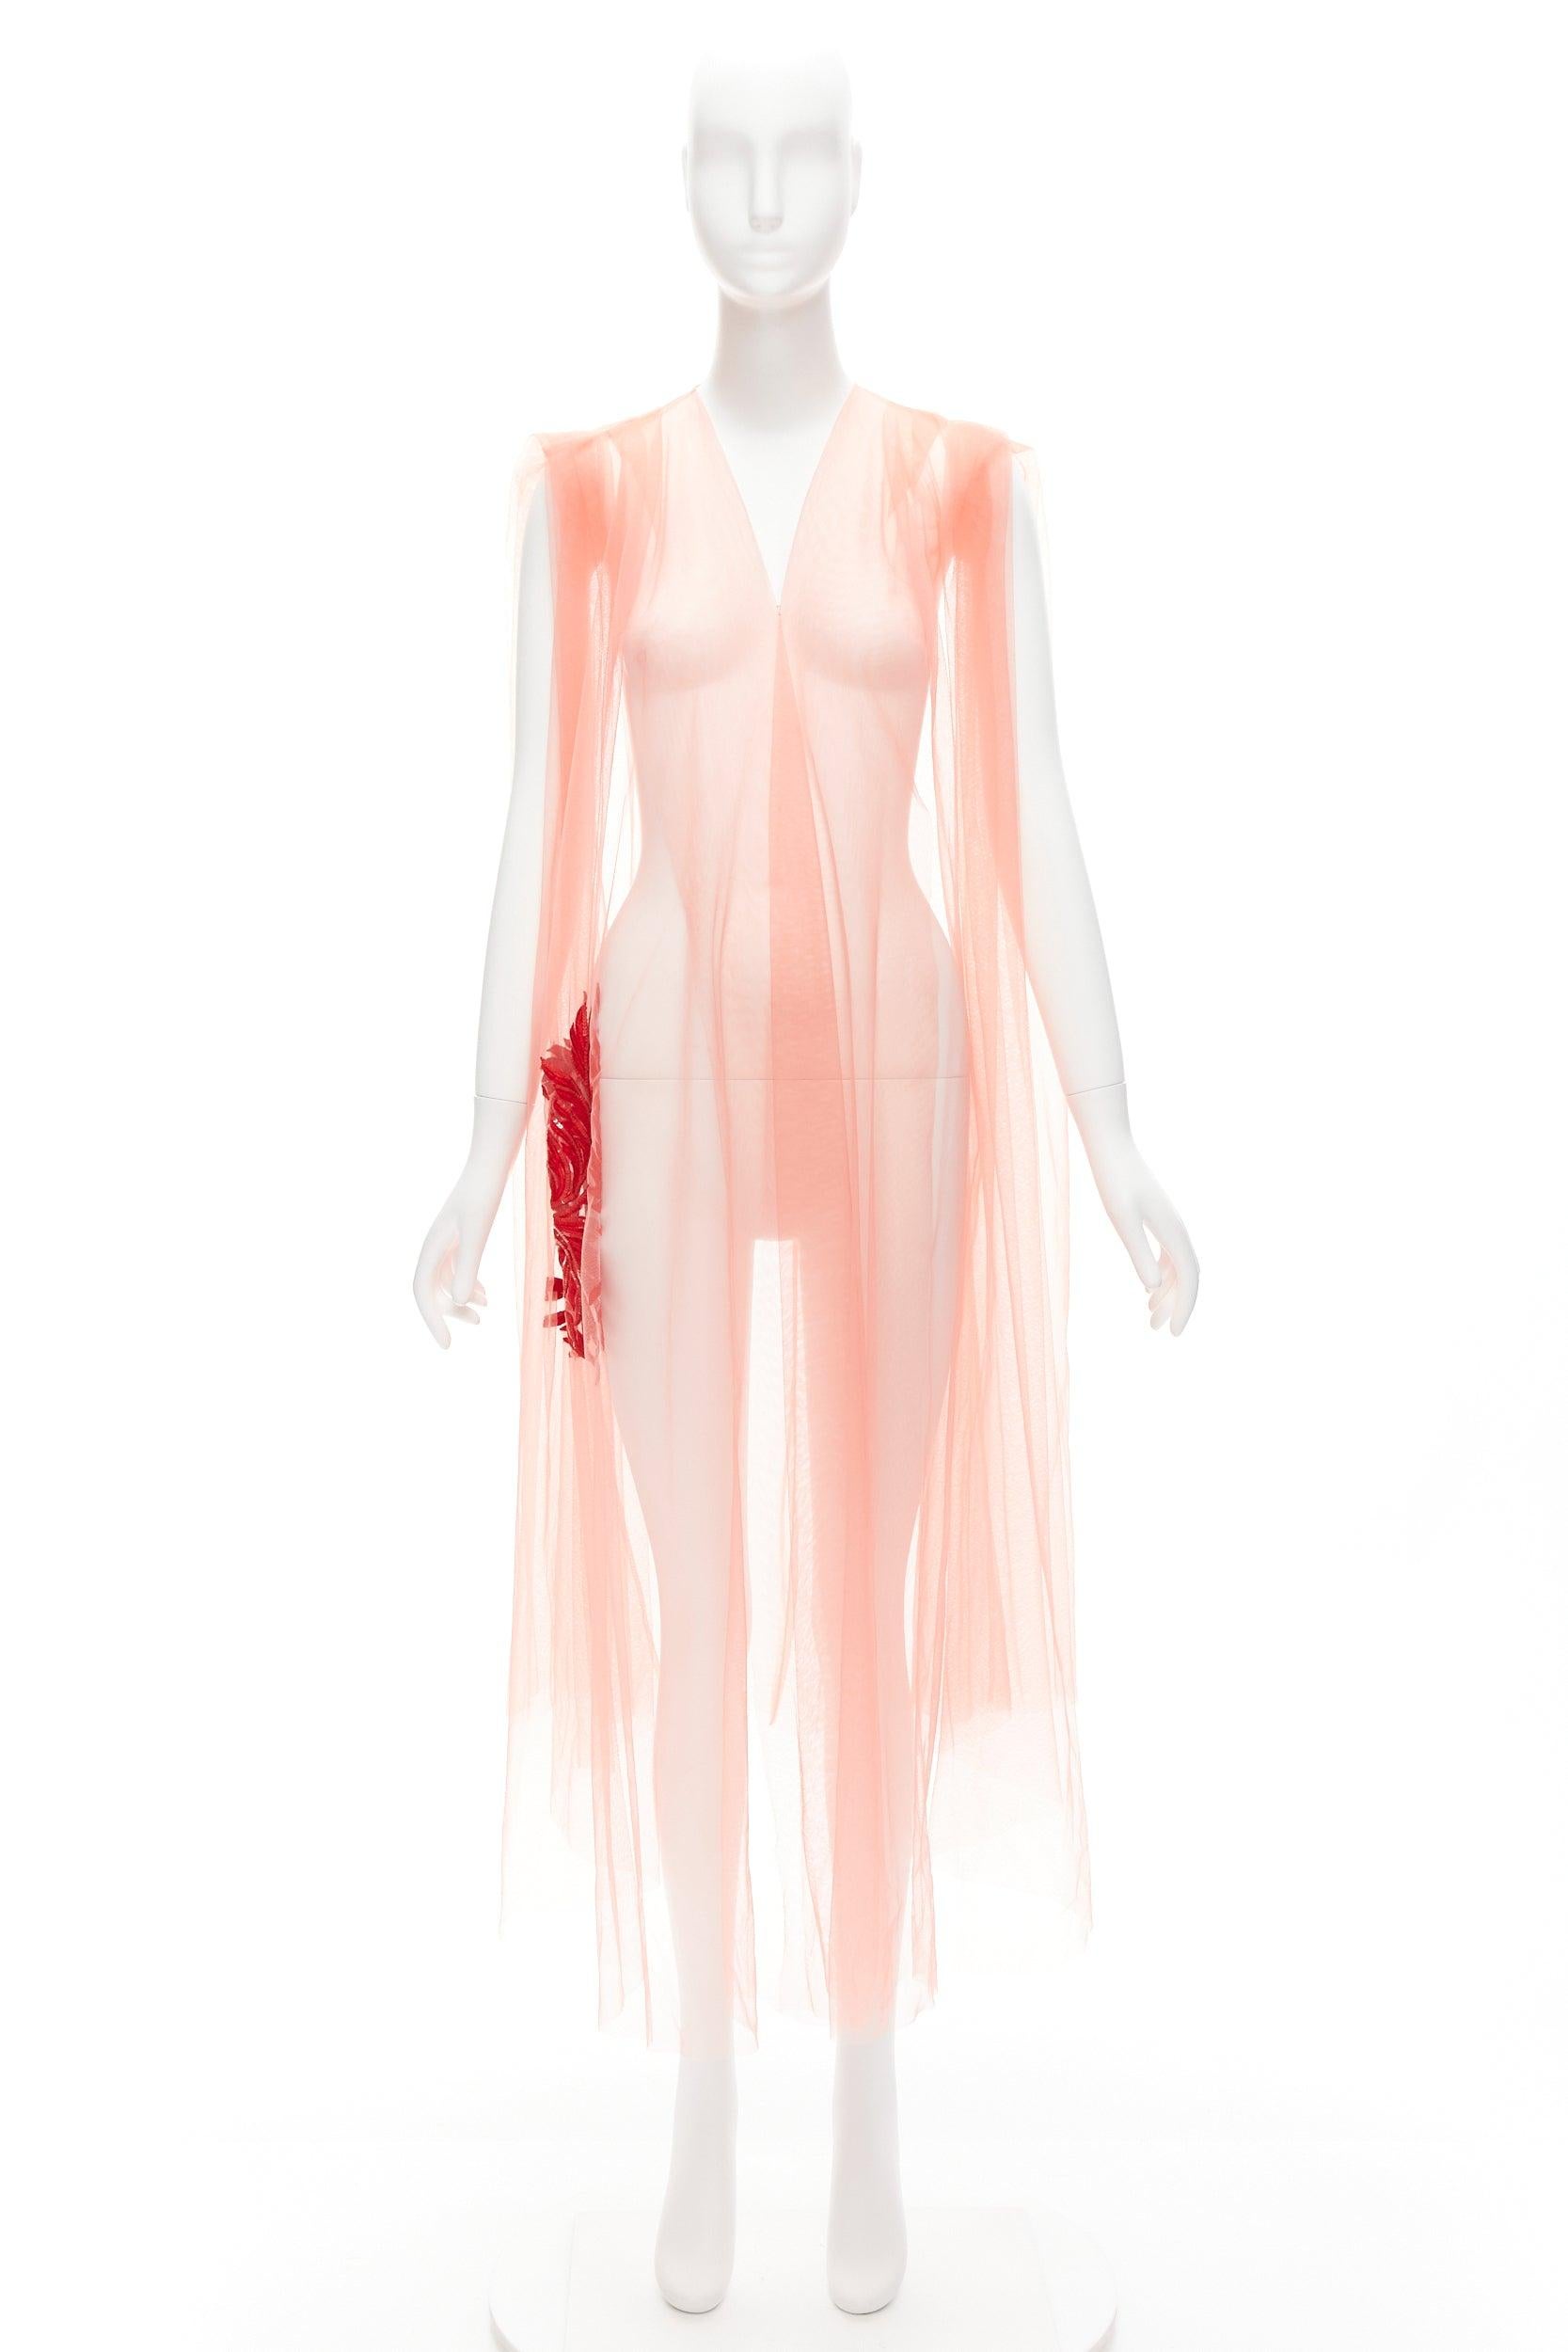 DRIES VAN NOTEN pink tulle red leaf embroidery V neck sheer fairy dress For Sale 4